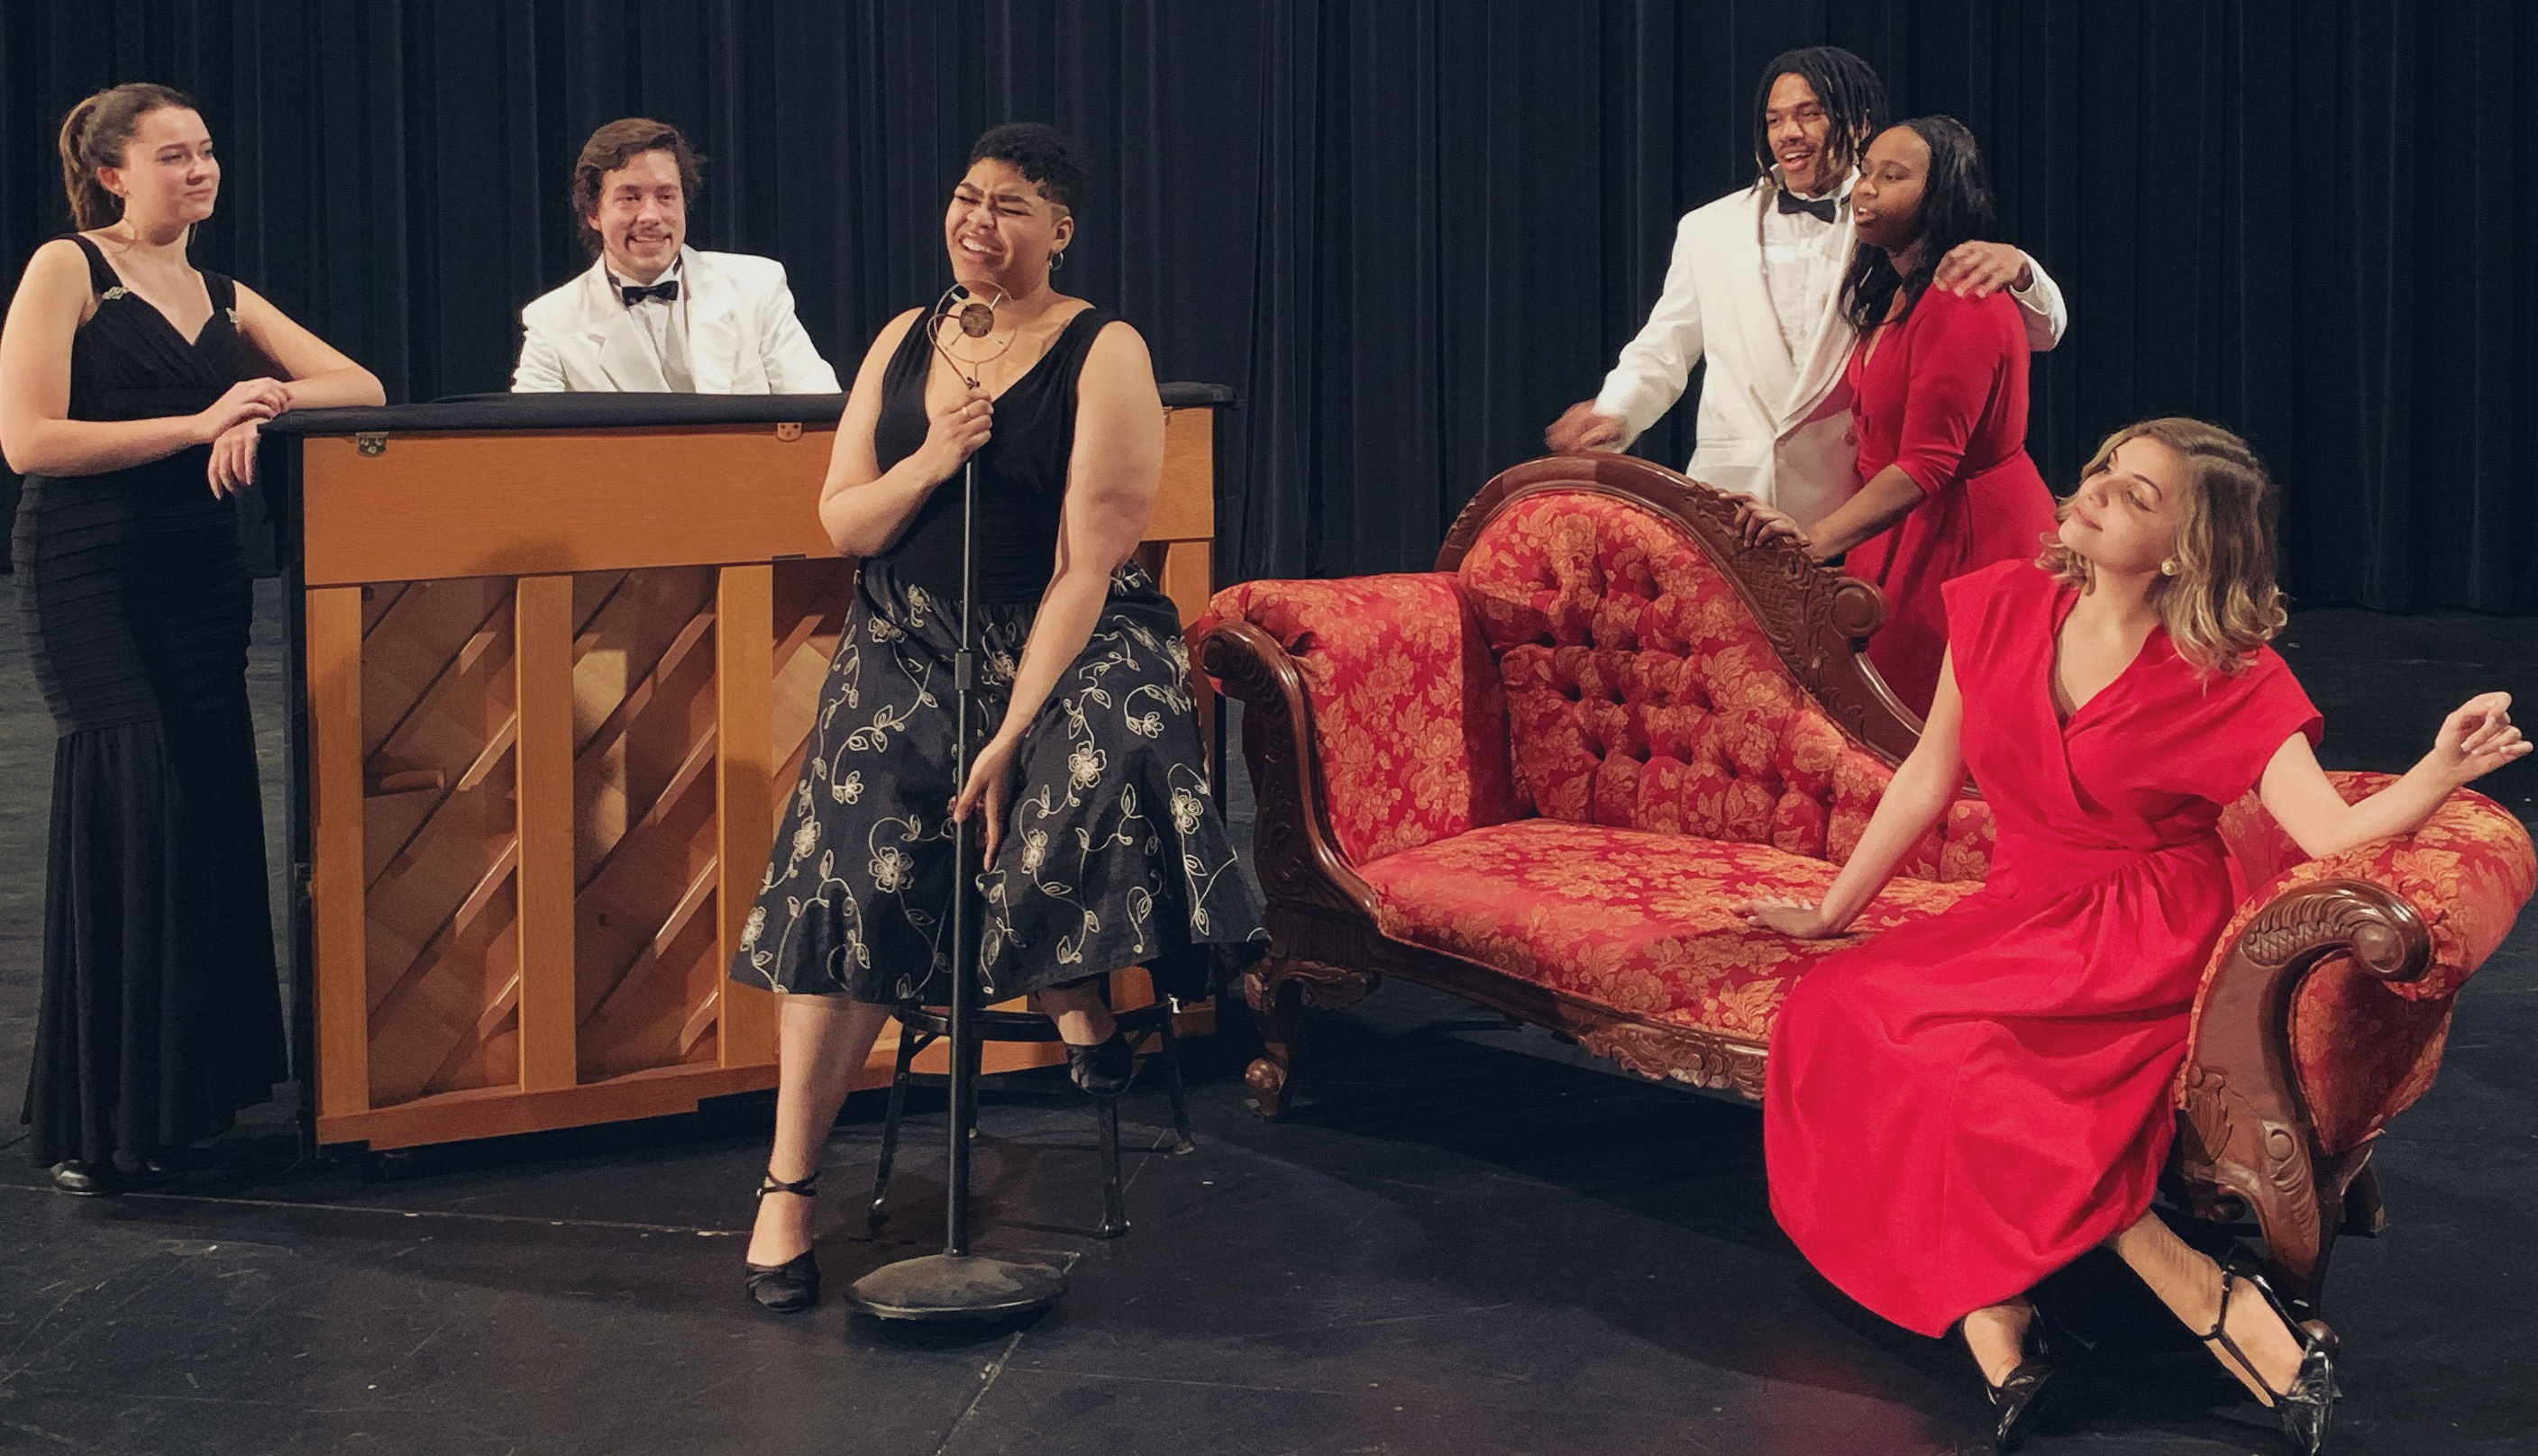 Among the students performing in the Valentine's Day cabaret are, from the left, Samantha Gurd, Clark Hergenrother, Destinee Thompson, Malik Montgomery, Machiah Davis and AnnMarie Lowerre.